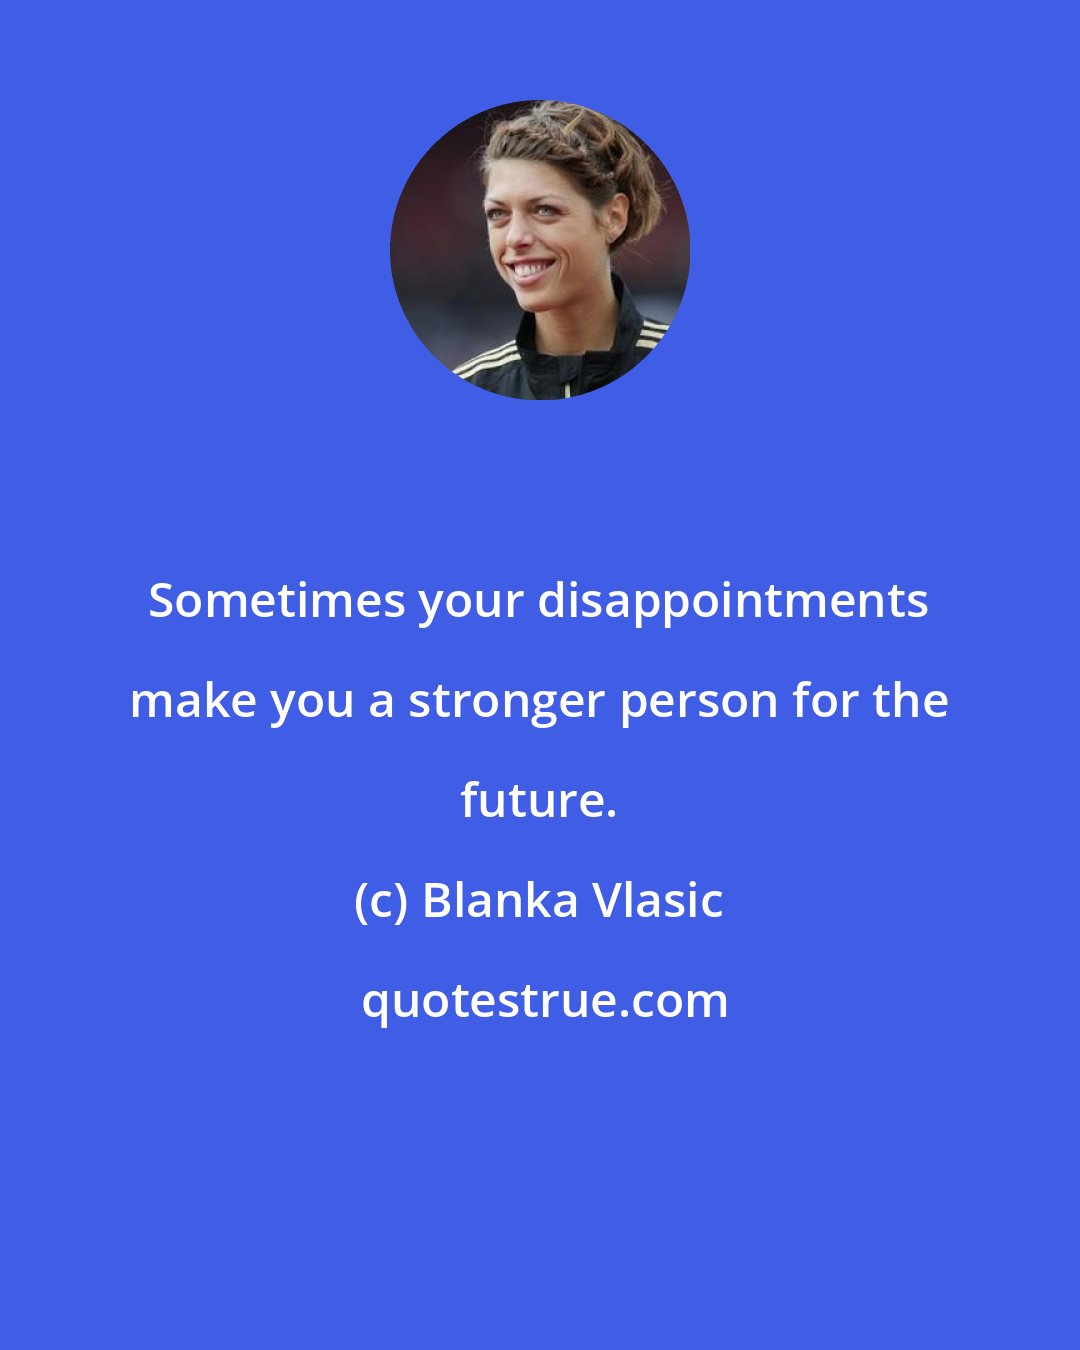 Blanka Vlasic: Sometimes your disappointments make you a stronger person for the future.